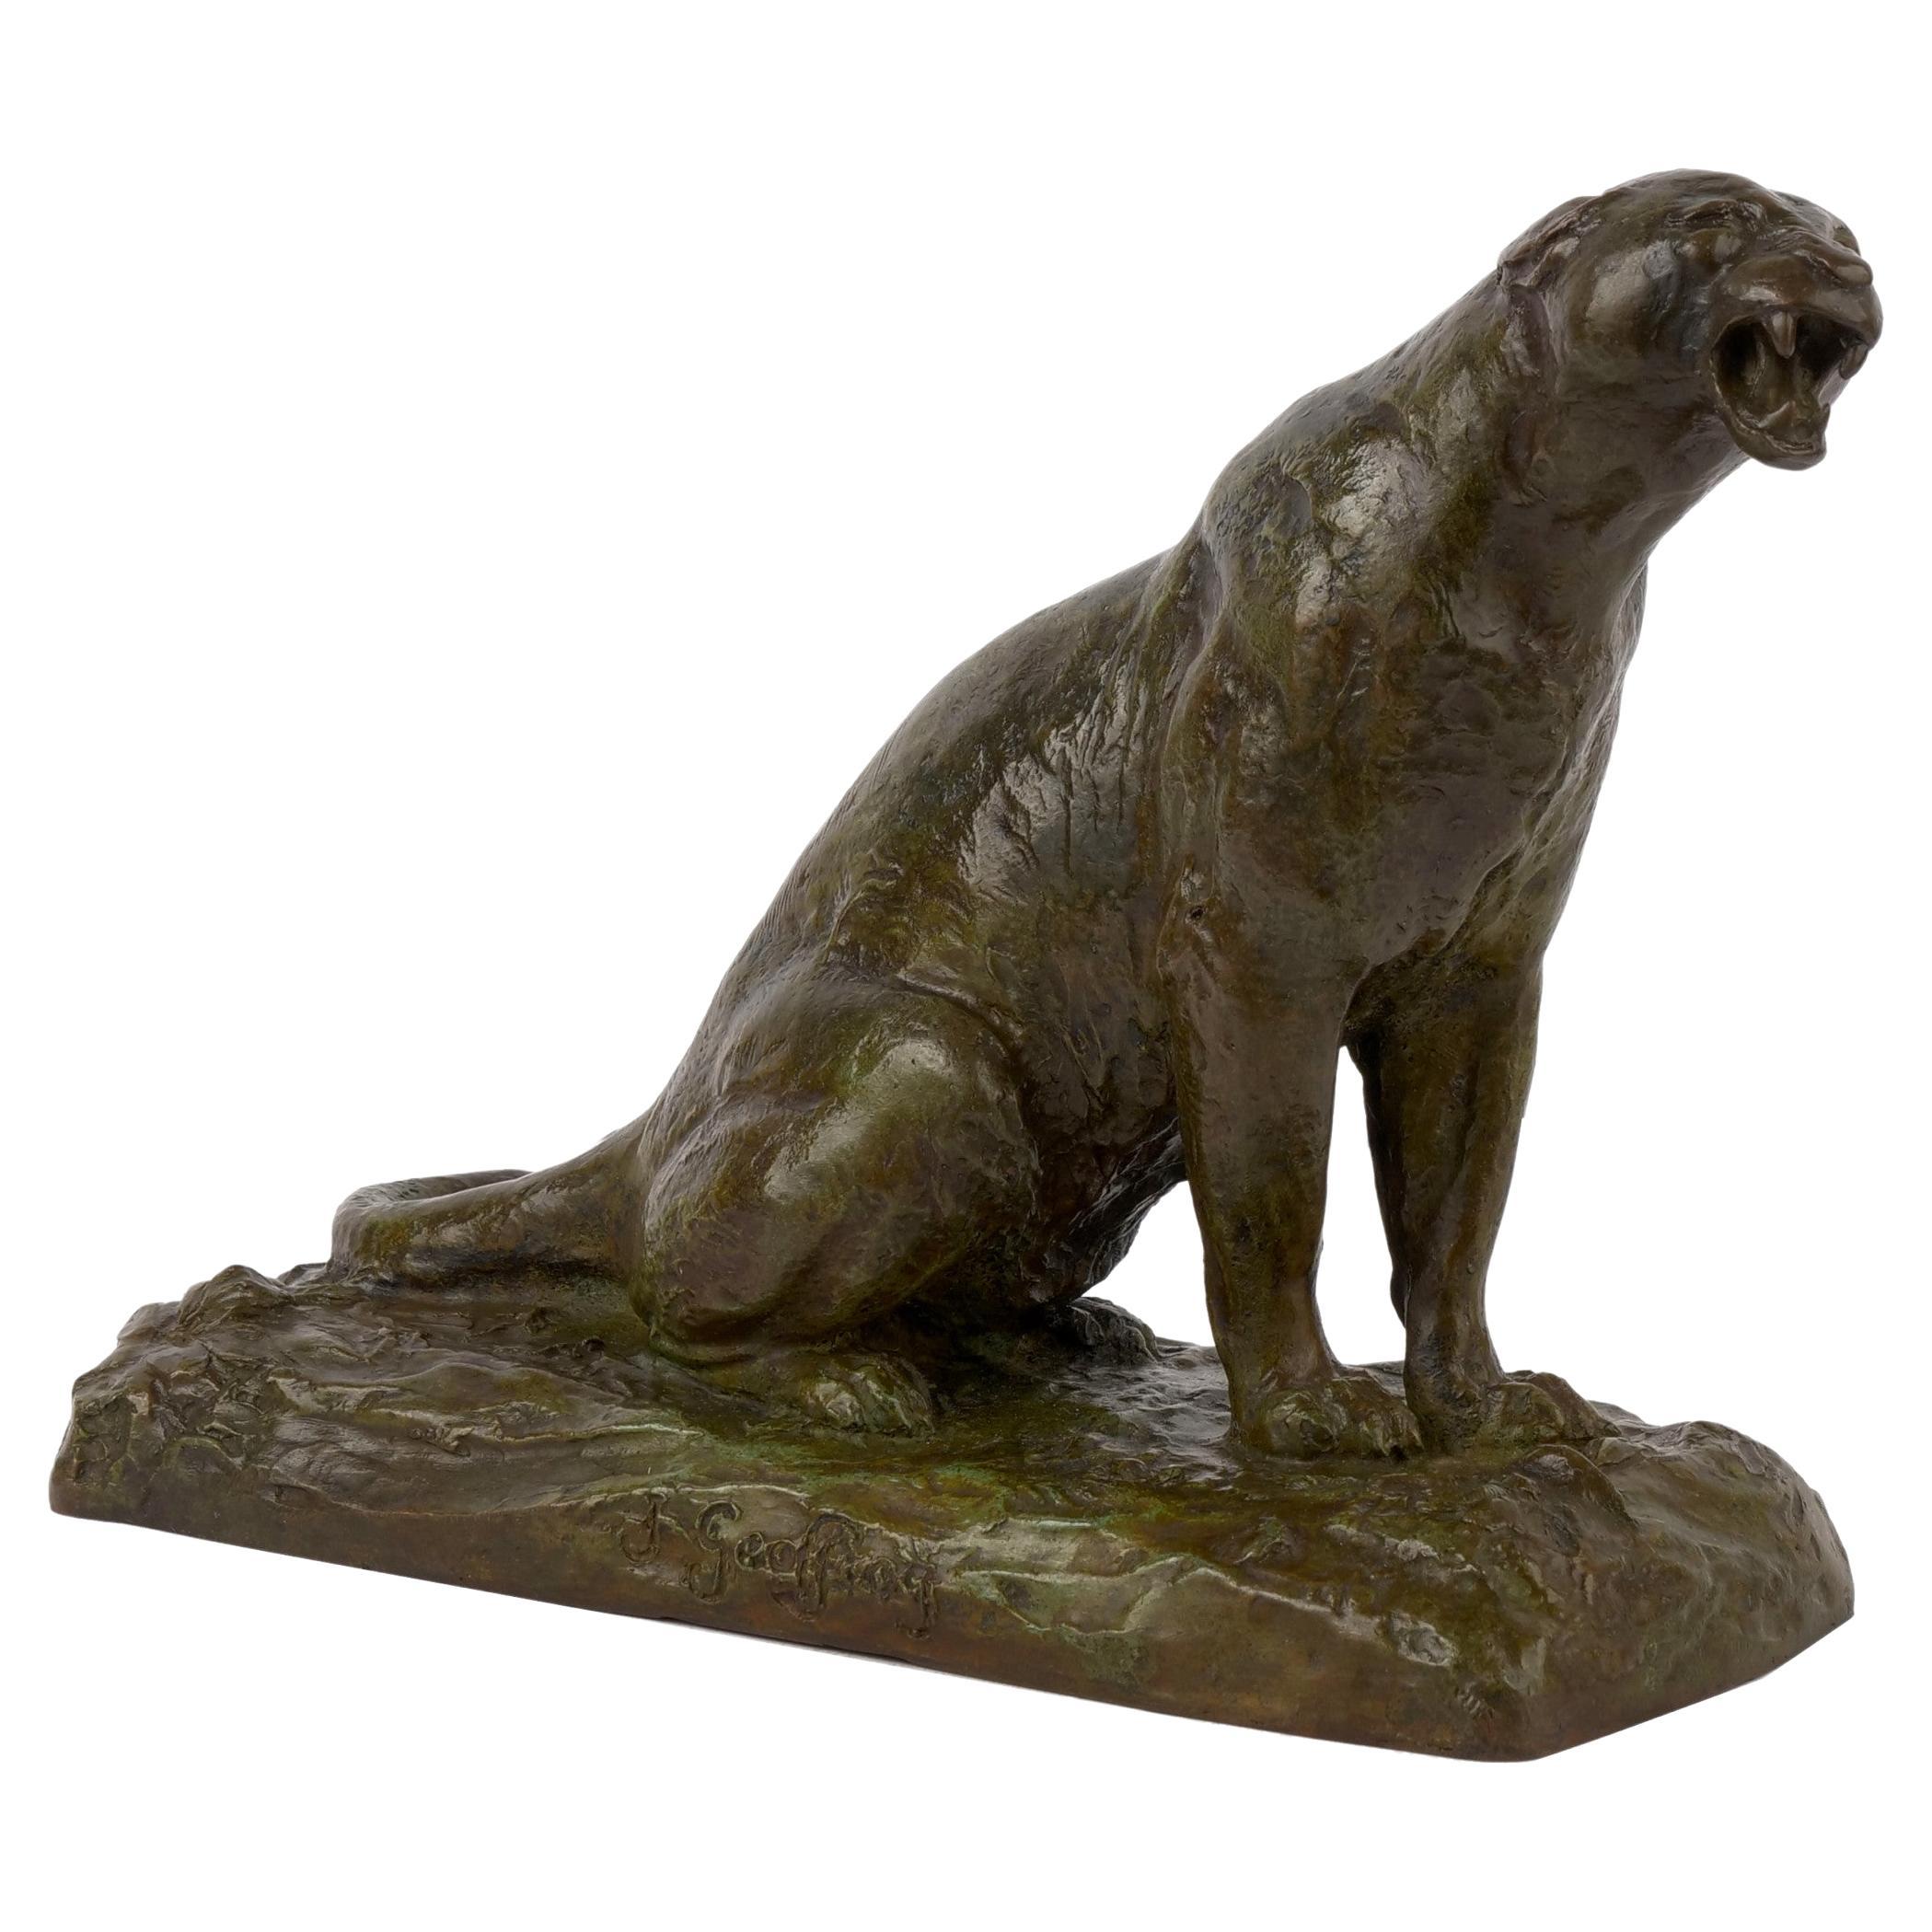 “Roaring Jaguar” Art Deco French Bronze Sculpture by Adolphe Geoffroy & Susse For Sale